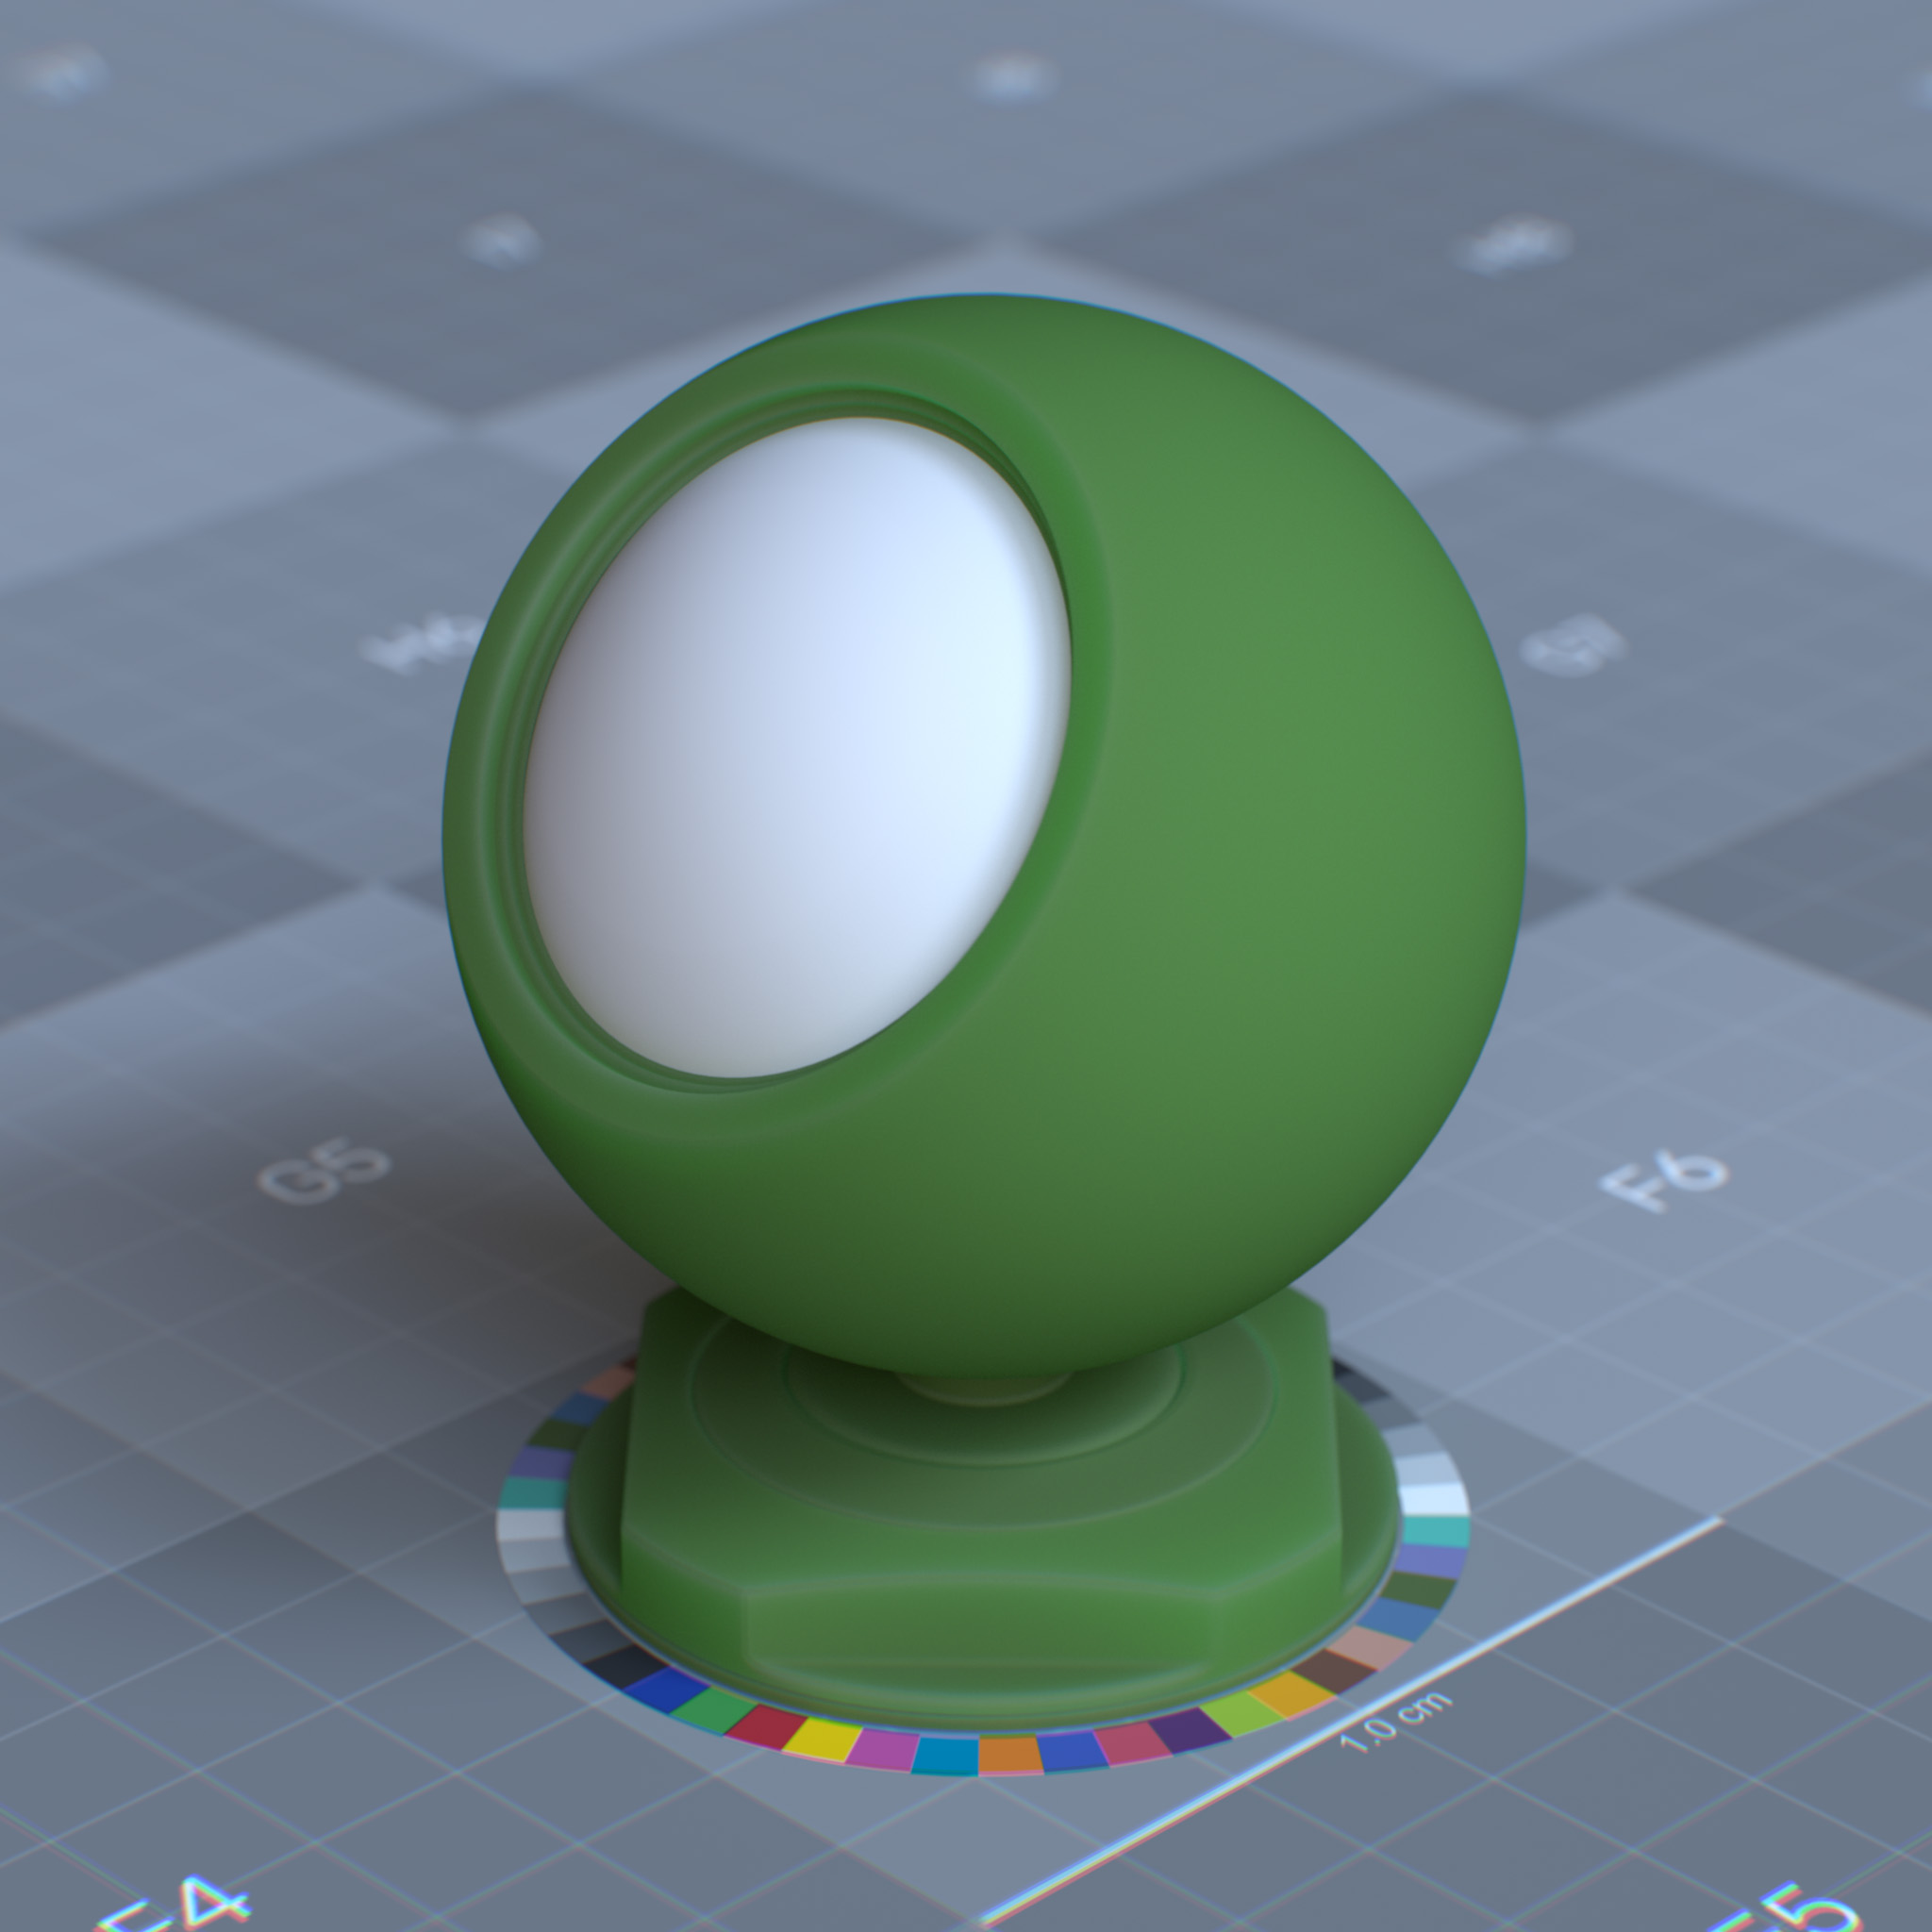 rtx_material_omnisurfacebase_specular_reflection_roughness_1p0